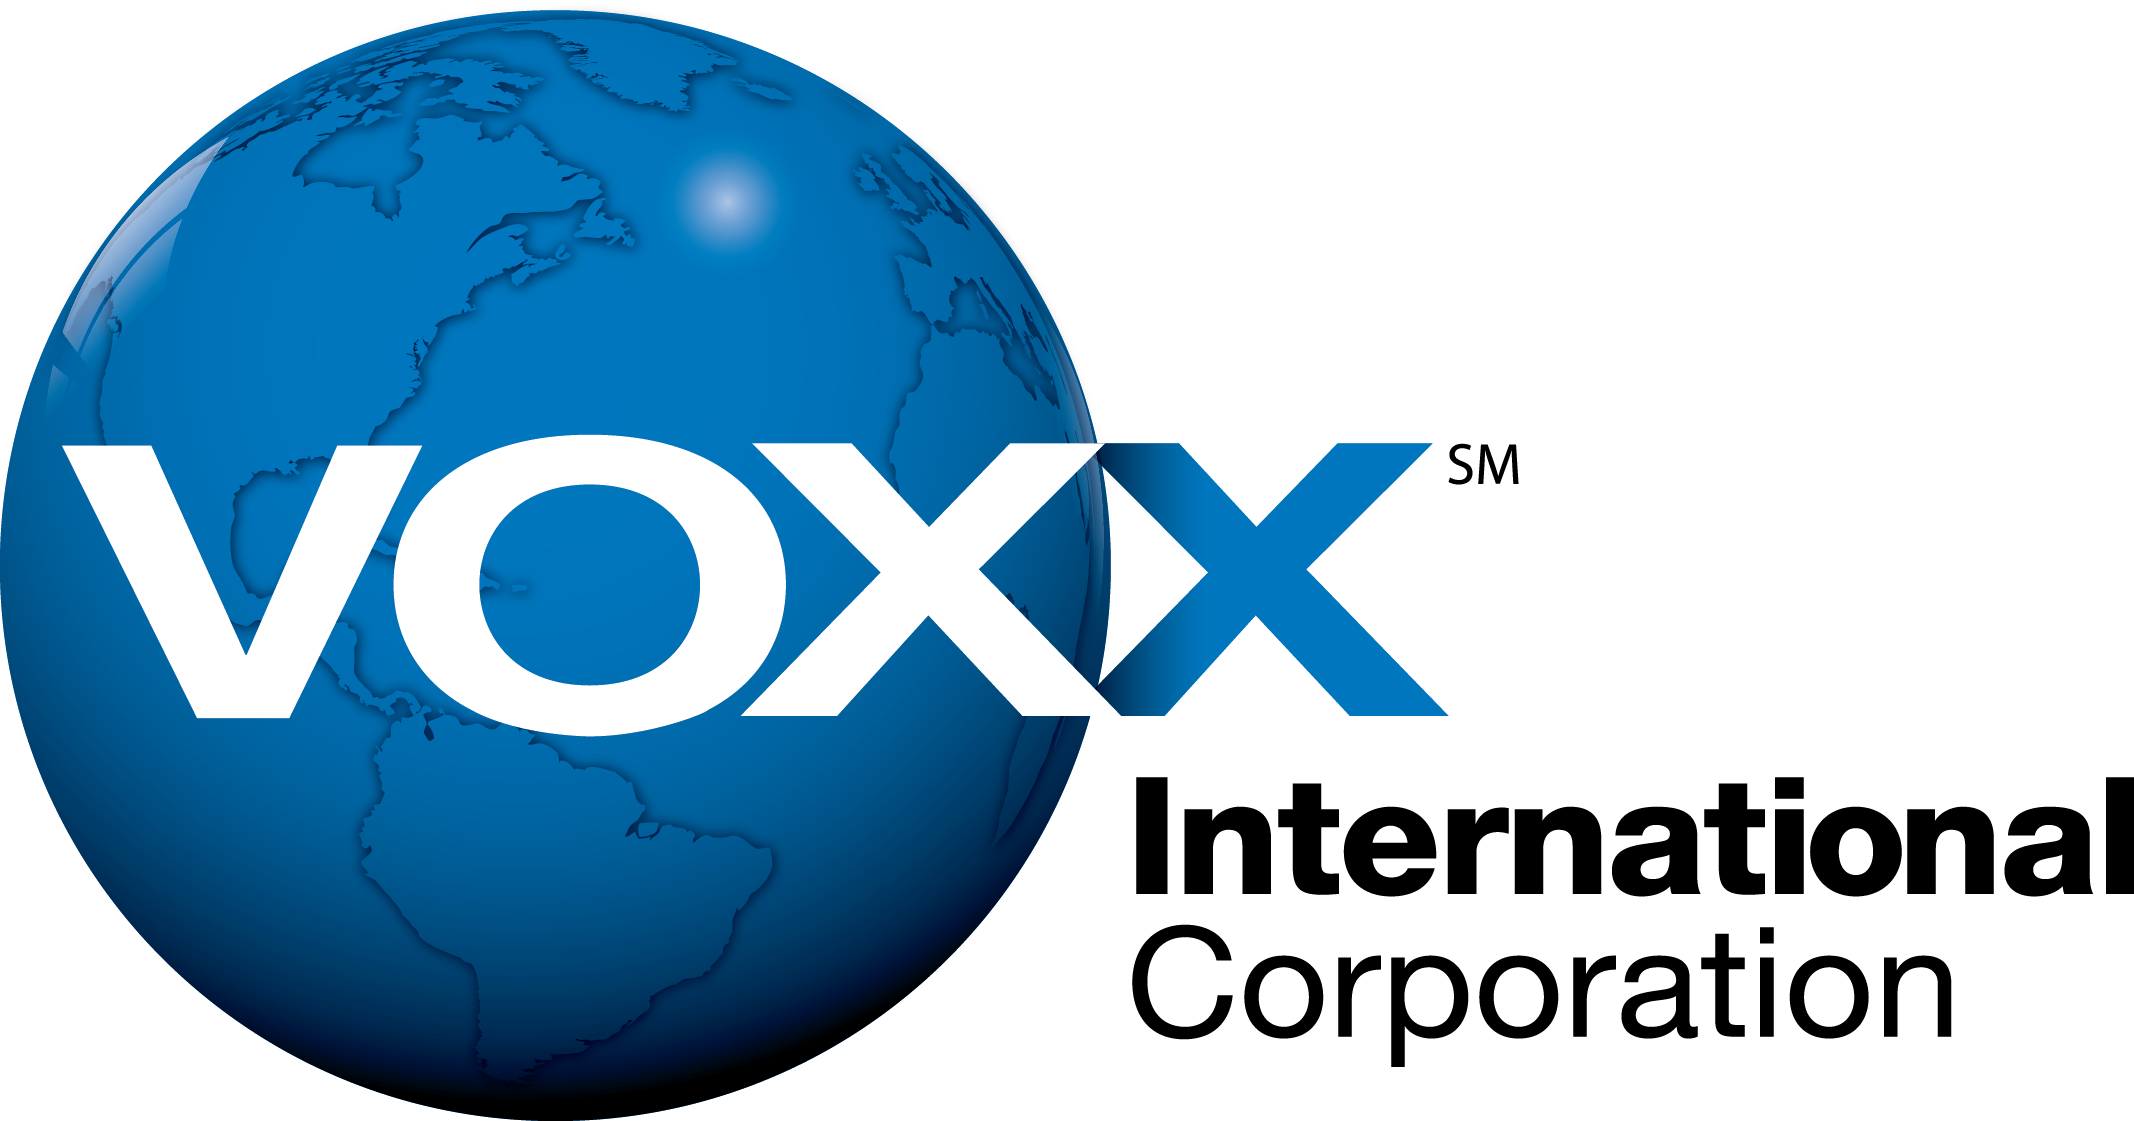 VOXX Adds to Tech Service Team to Oversee New Aftermarket Business | THE SHOP